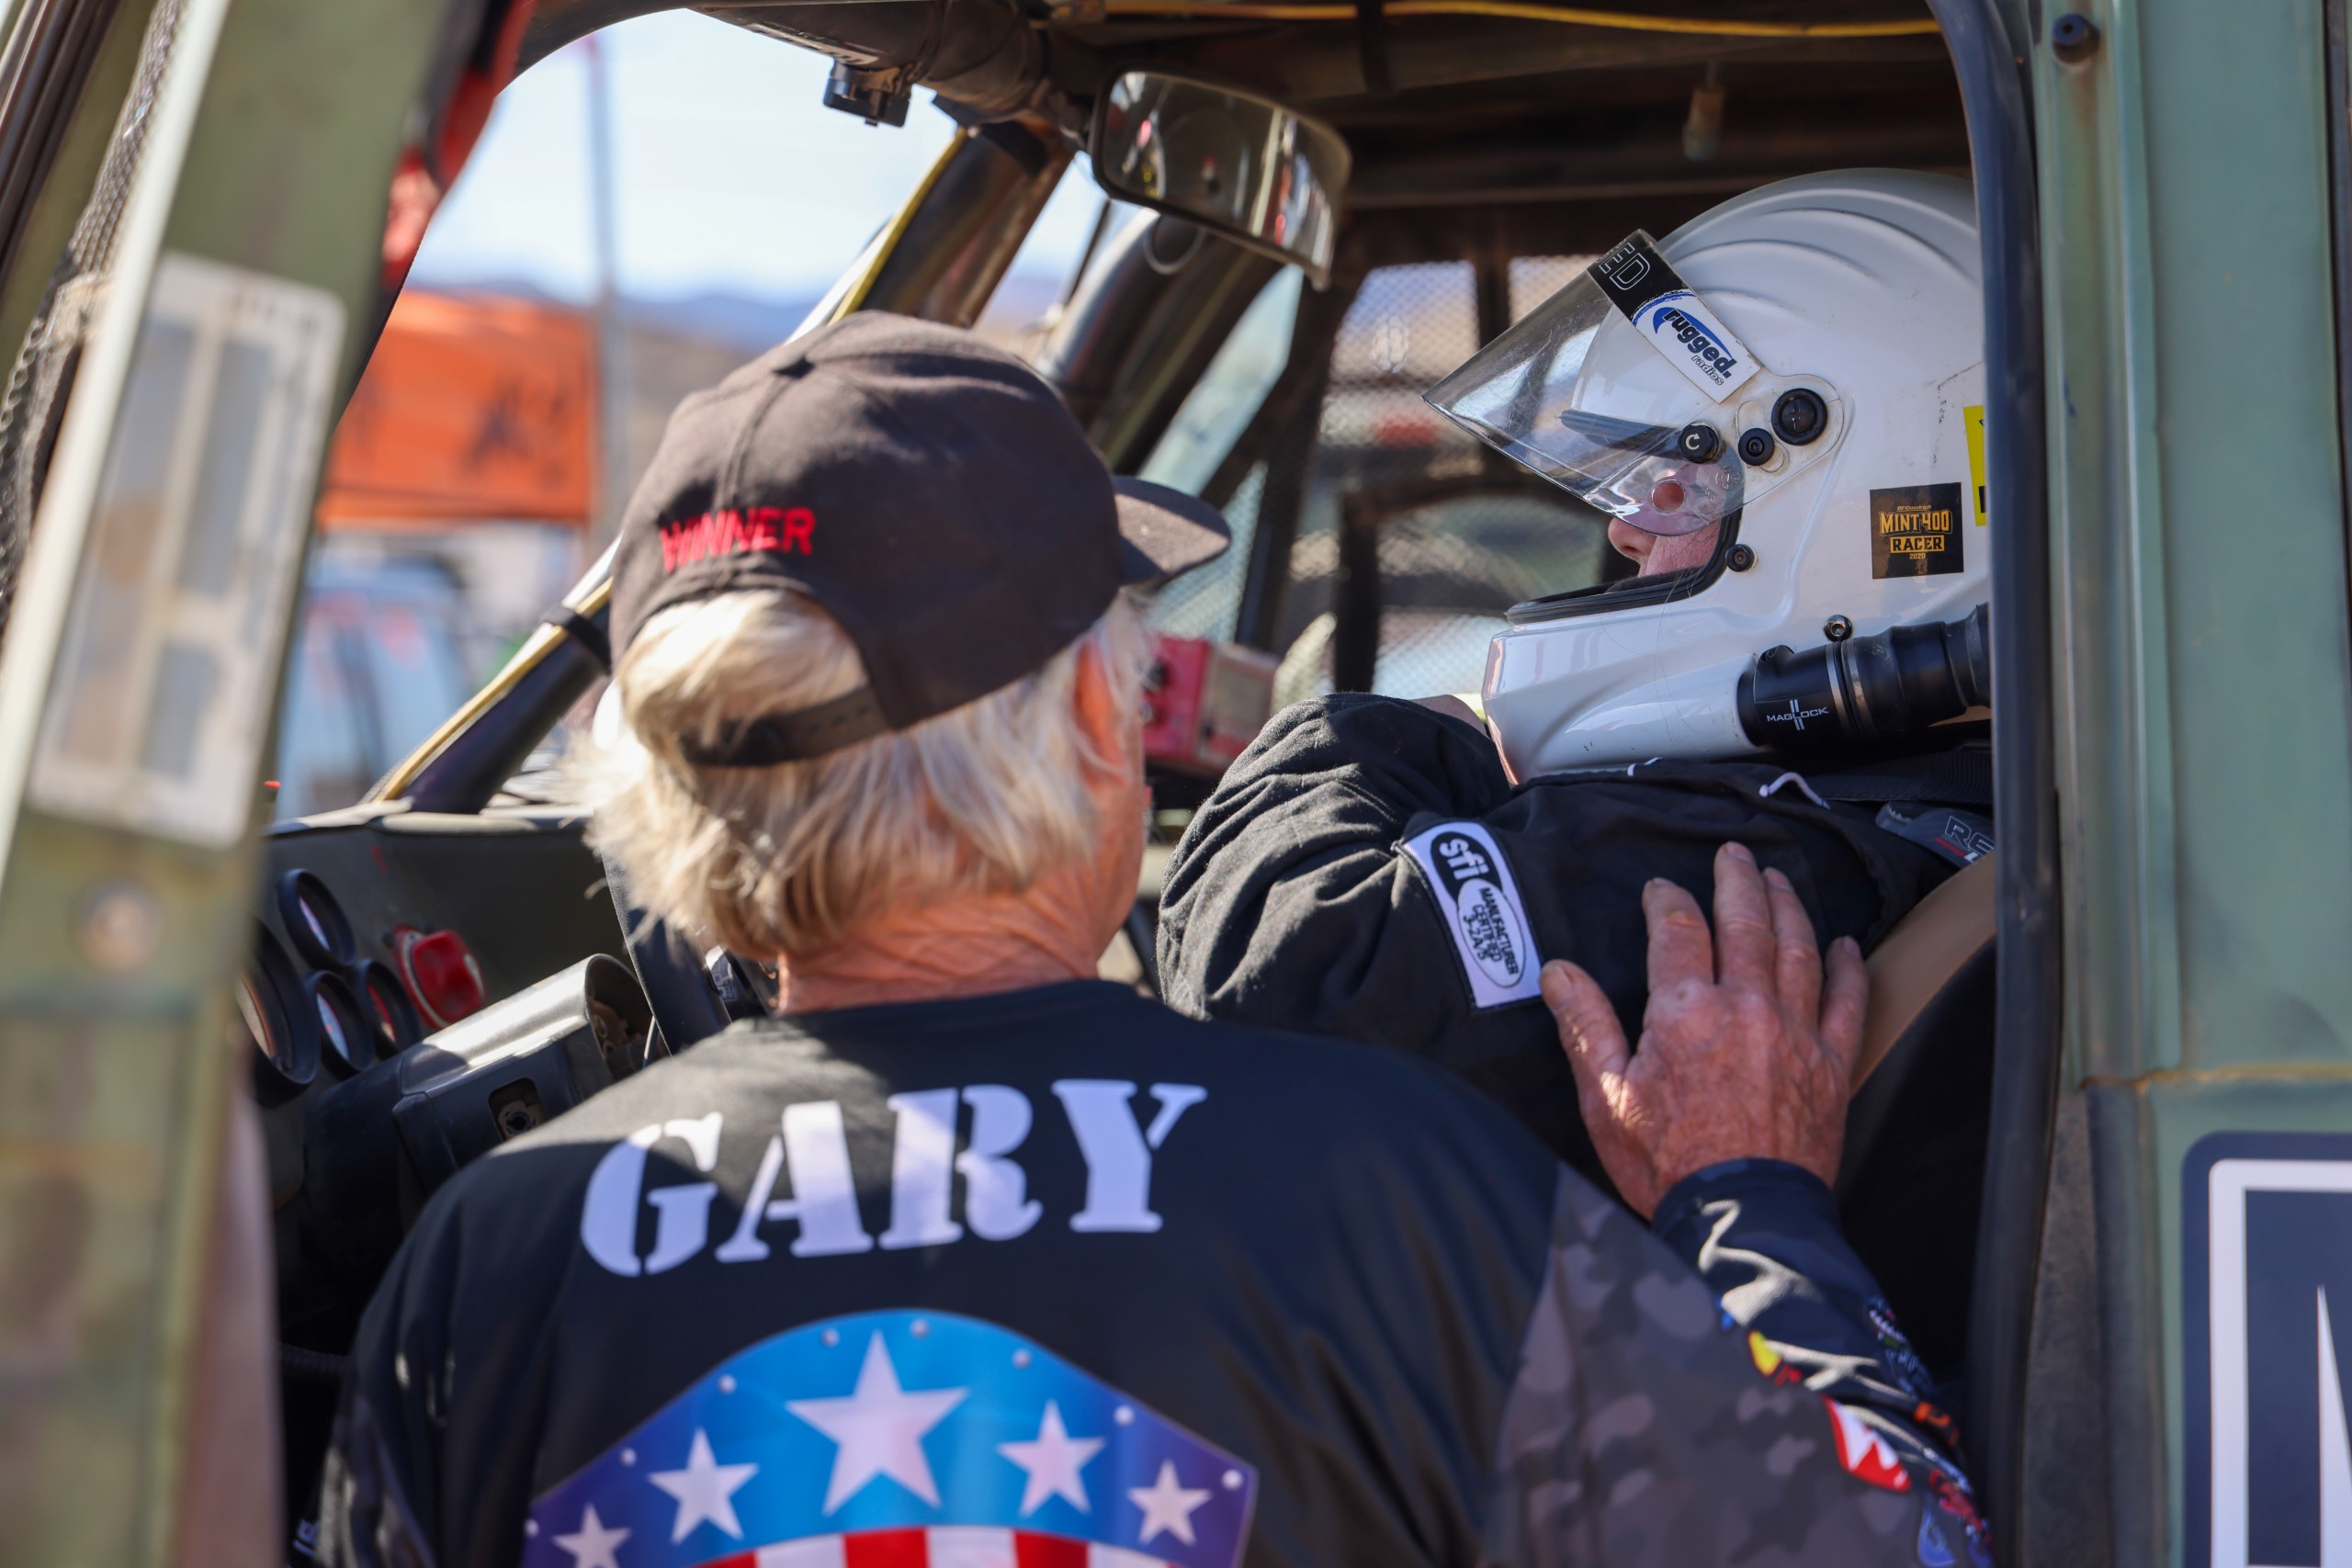 Michelle Jeffries Alarcon Conquers Mint 400 With Warfighter Made